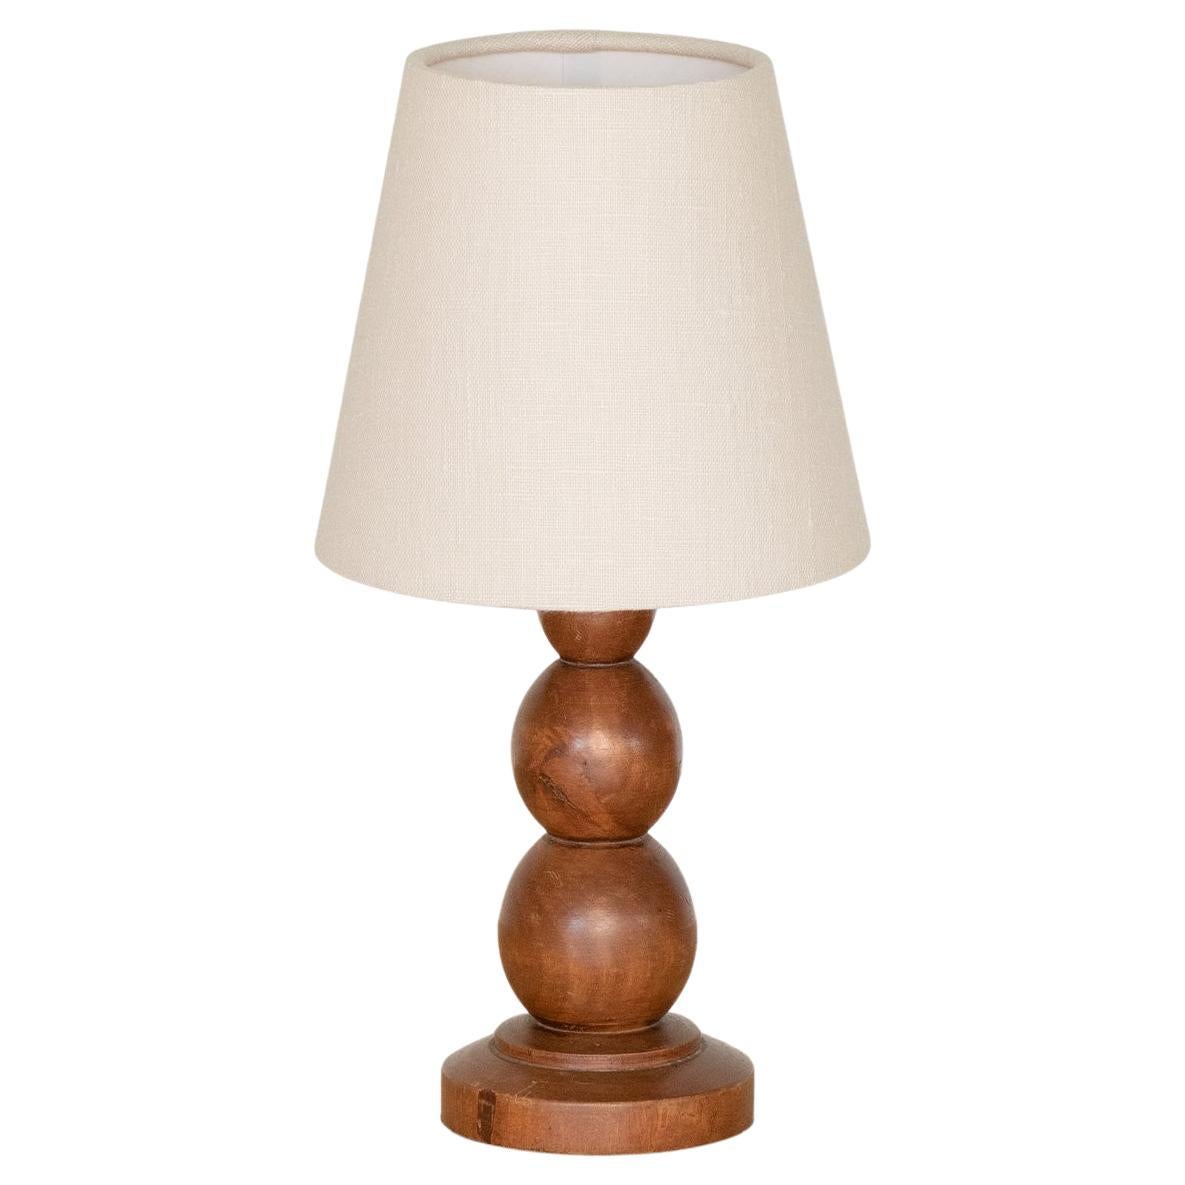 Petite French Stacked Ball Lamp